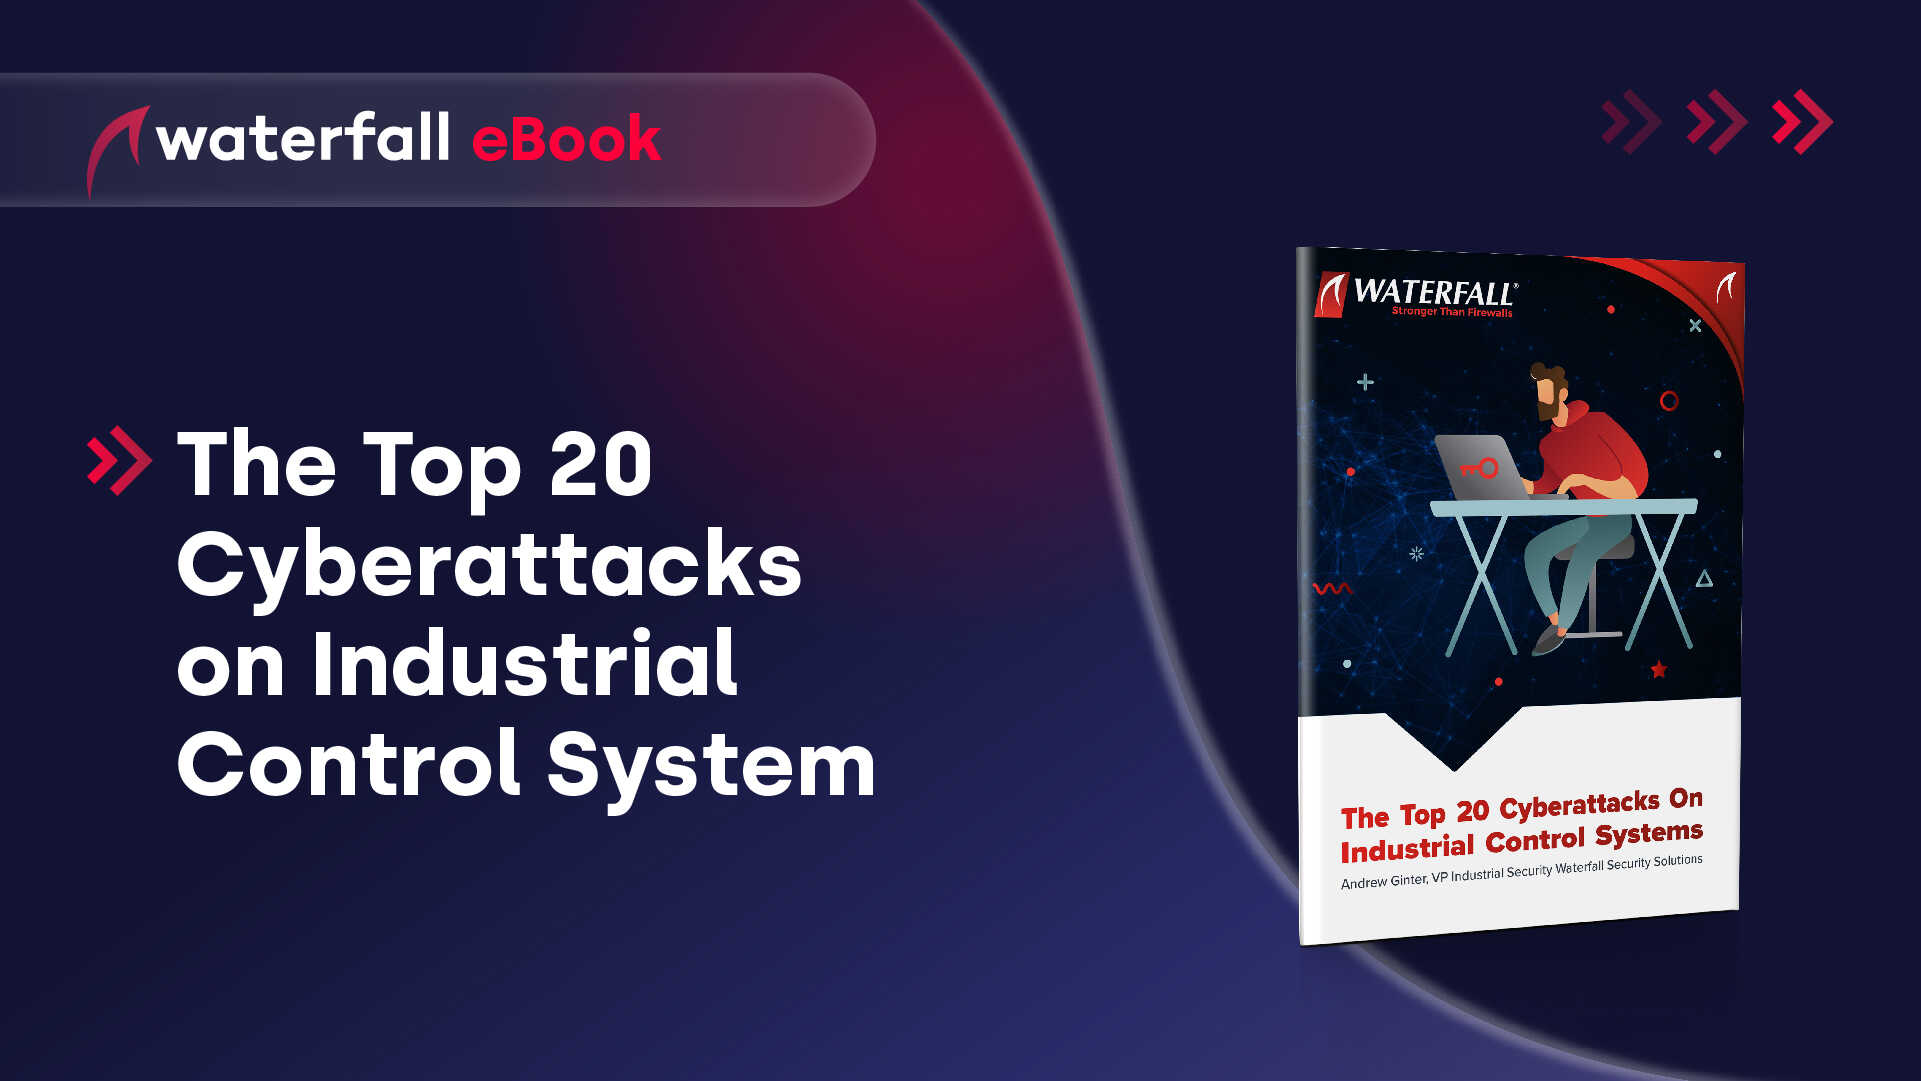 The Top 20 CyberAttacks On Industrial Control Systems whitepaper